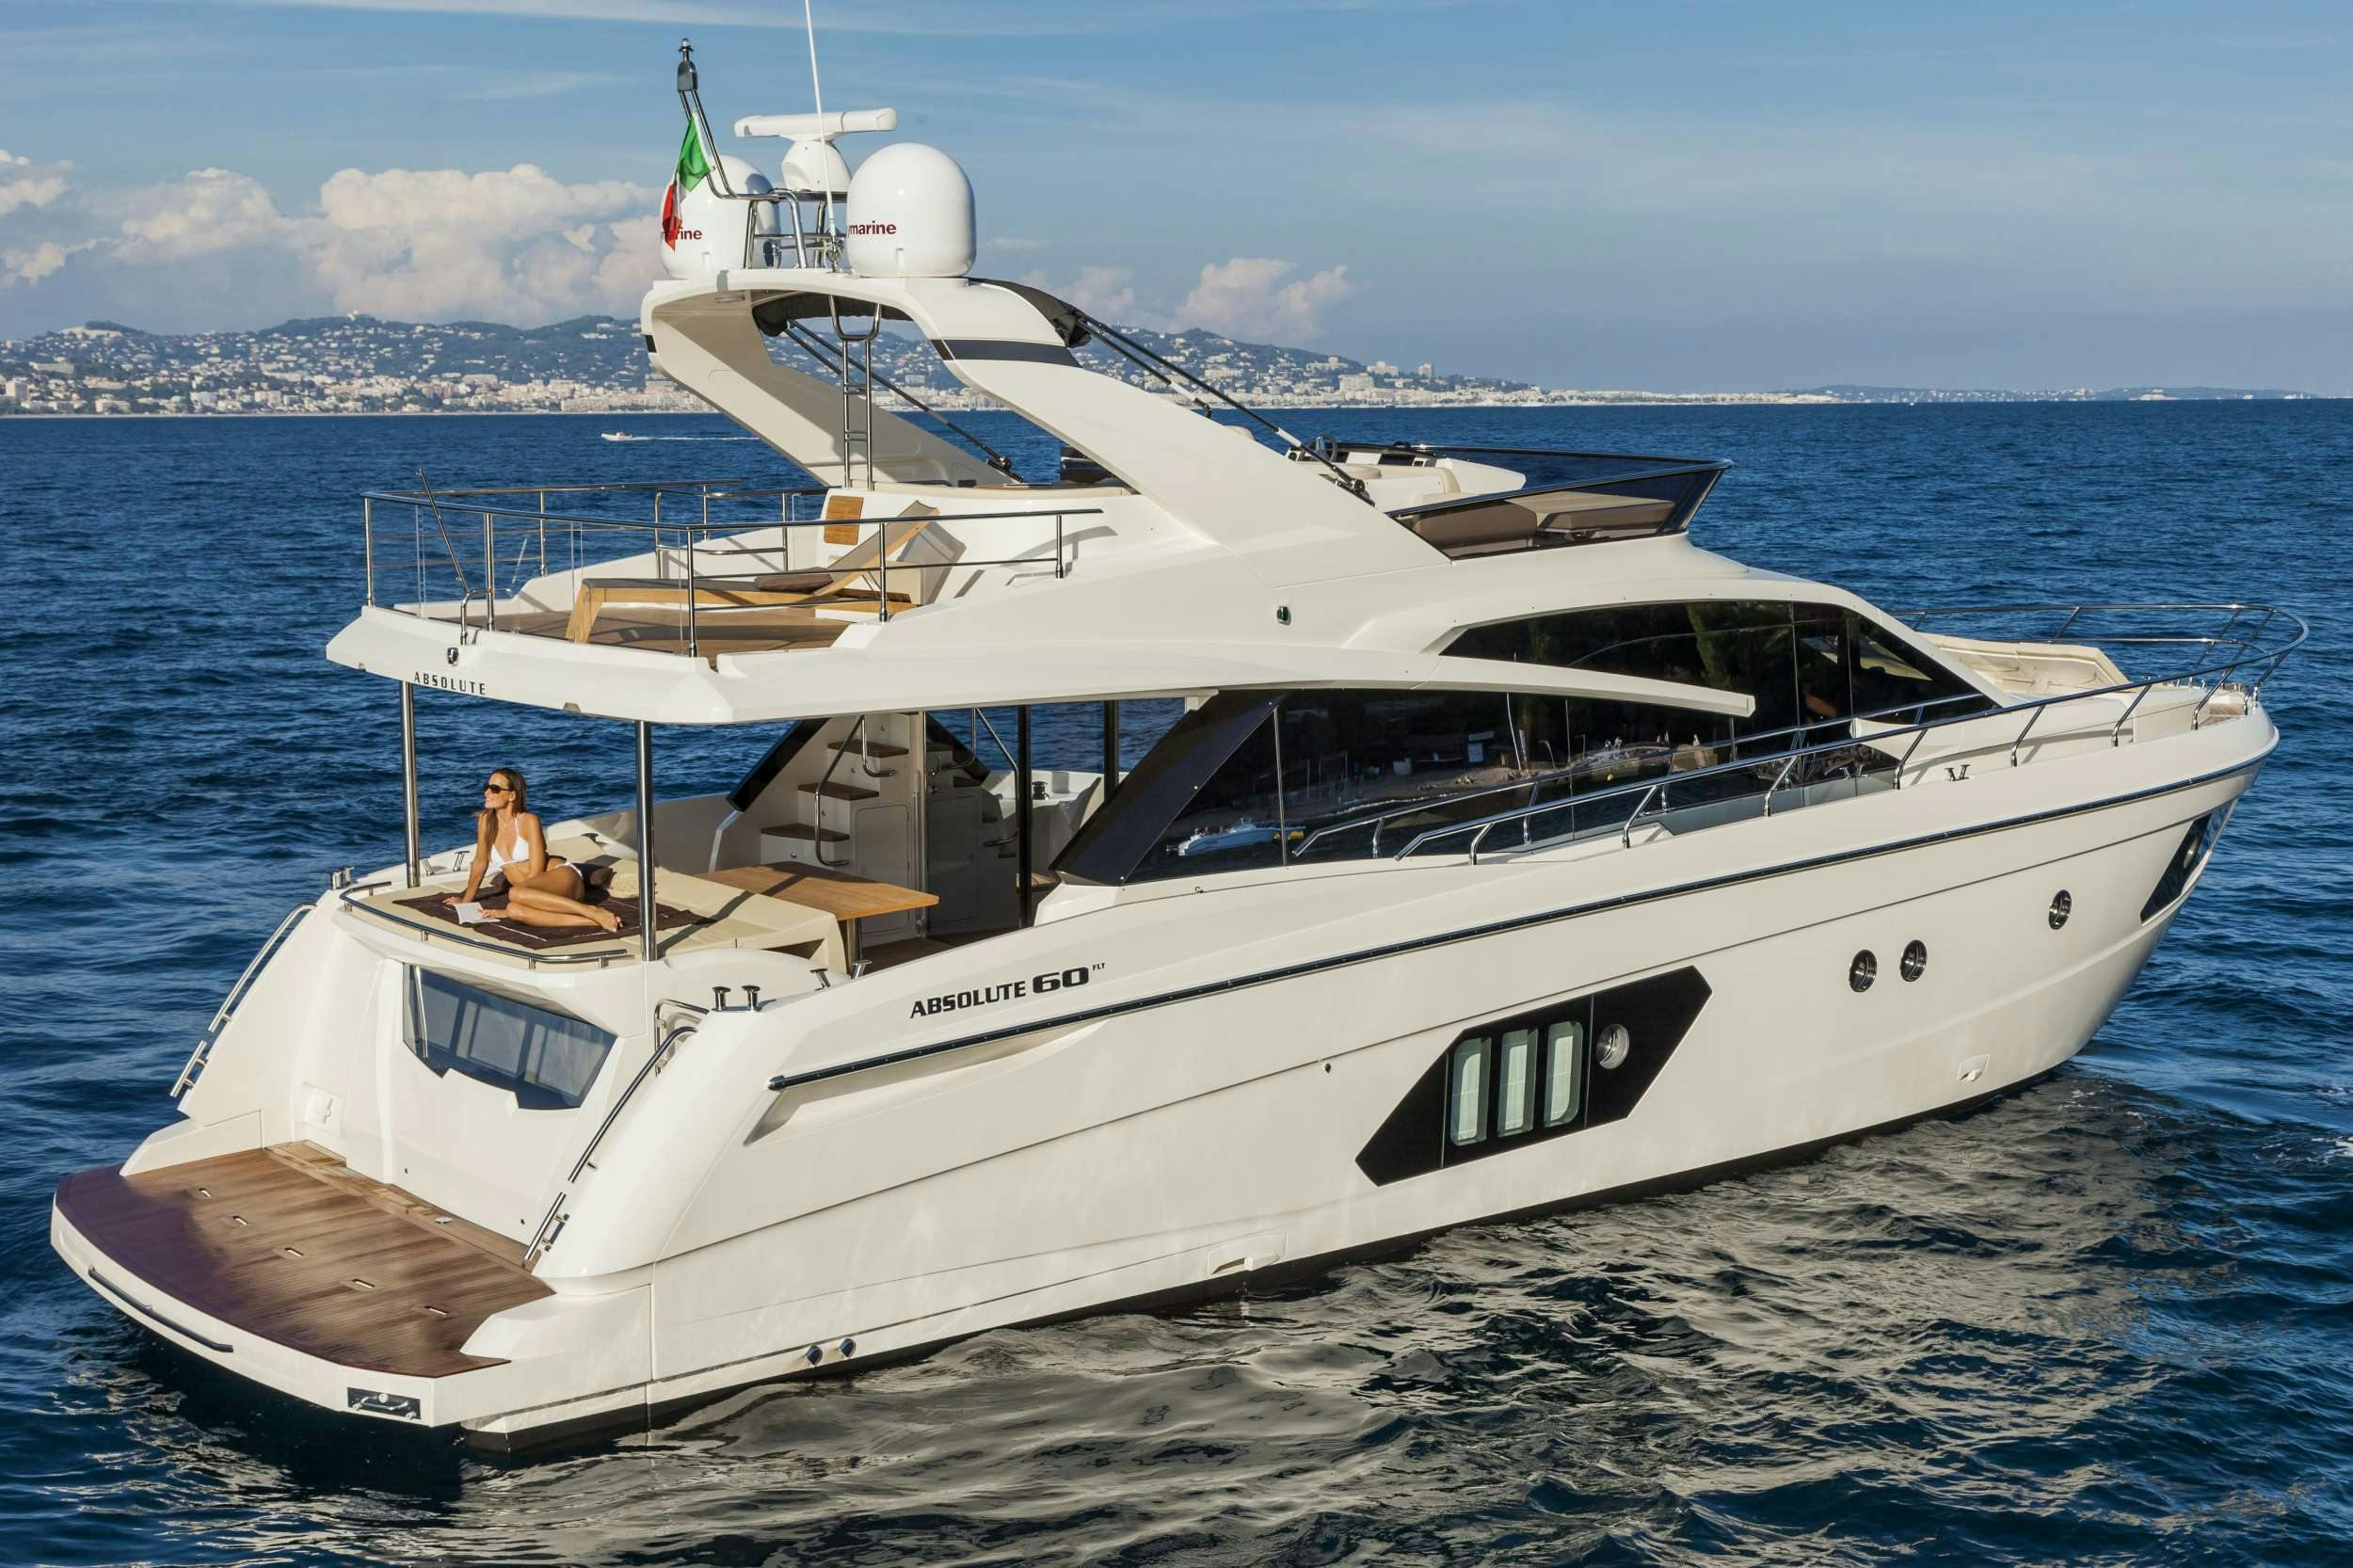 ABSOLUTE - Yacht Charter Cannes & Boat hire in Fr. Riviera, Corsica & Sardinia 1